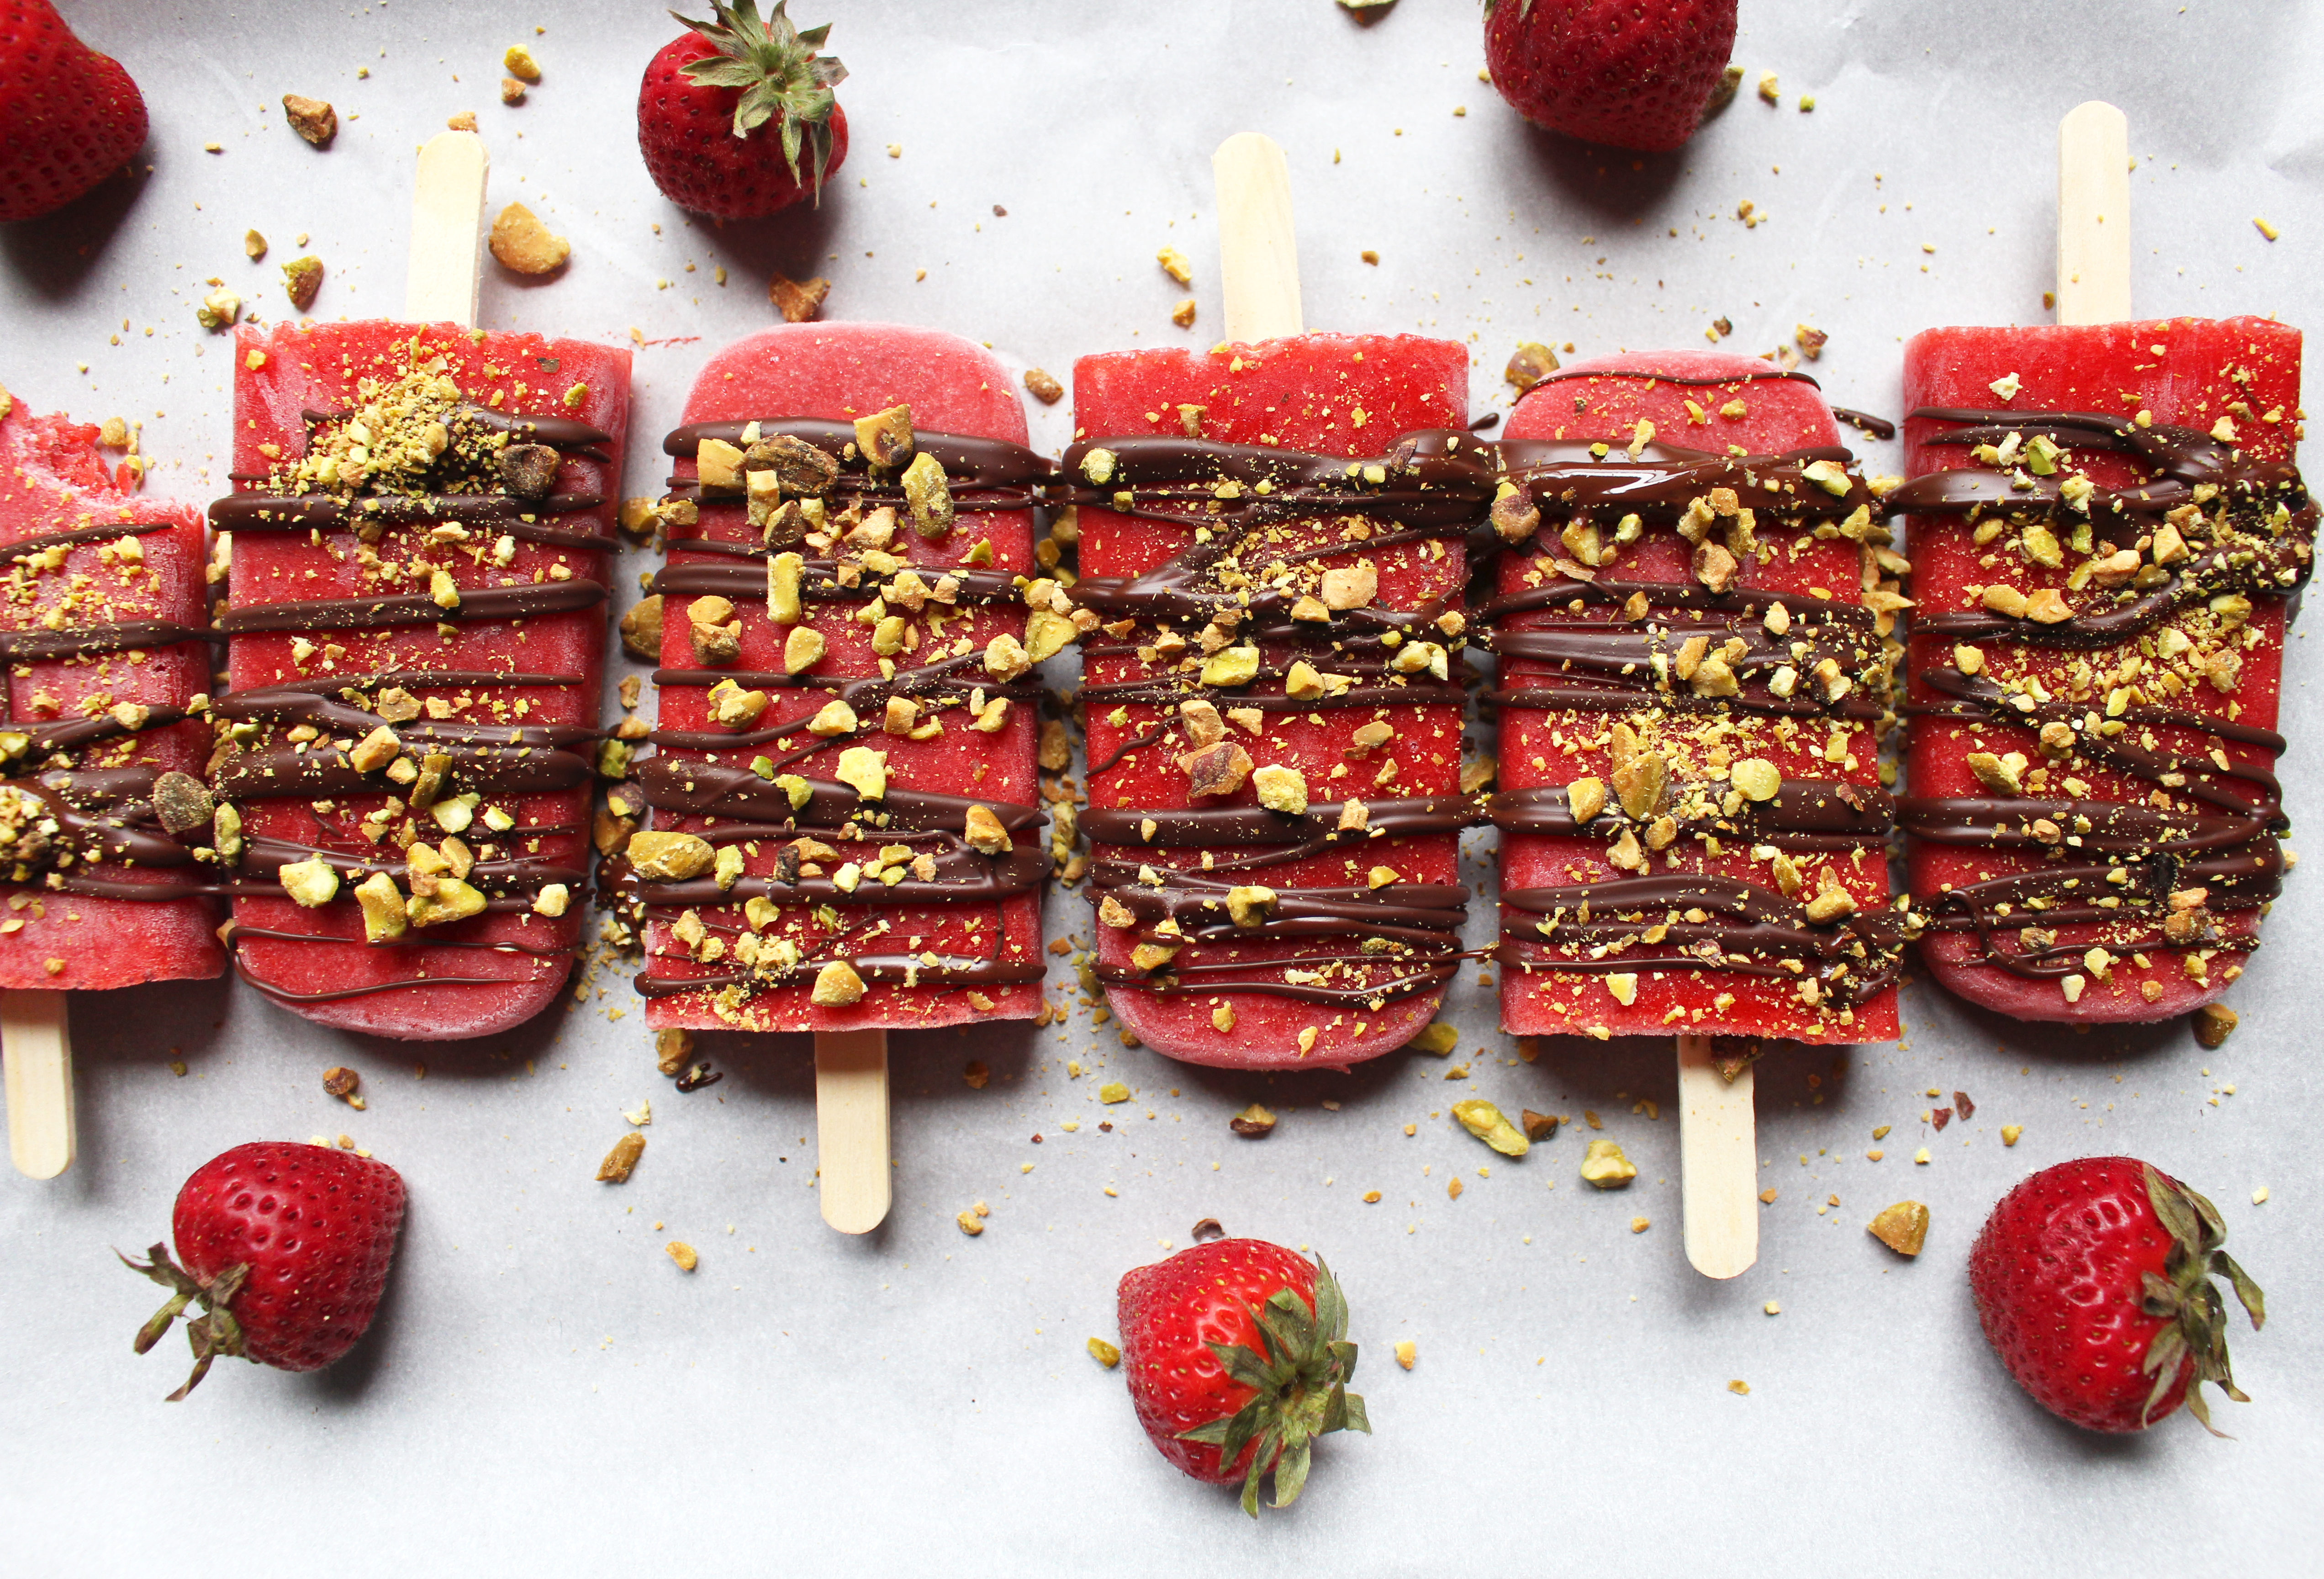 The juiciest strawberry popsicles with rose water and topped with chocolate and pistachios. The perfect sweet treat in summer! (GF, V, Refined sugar free)